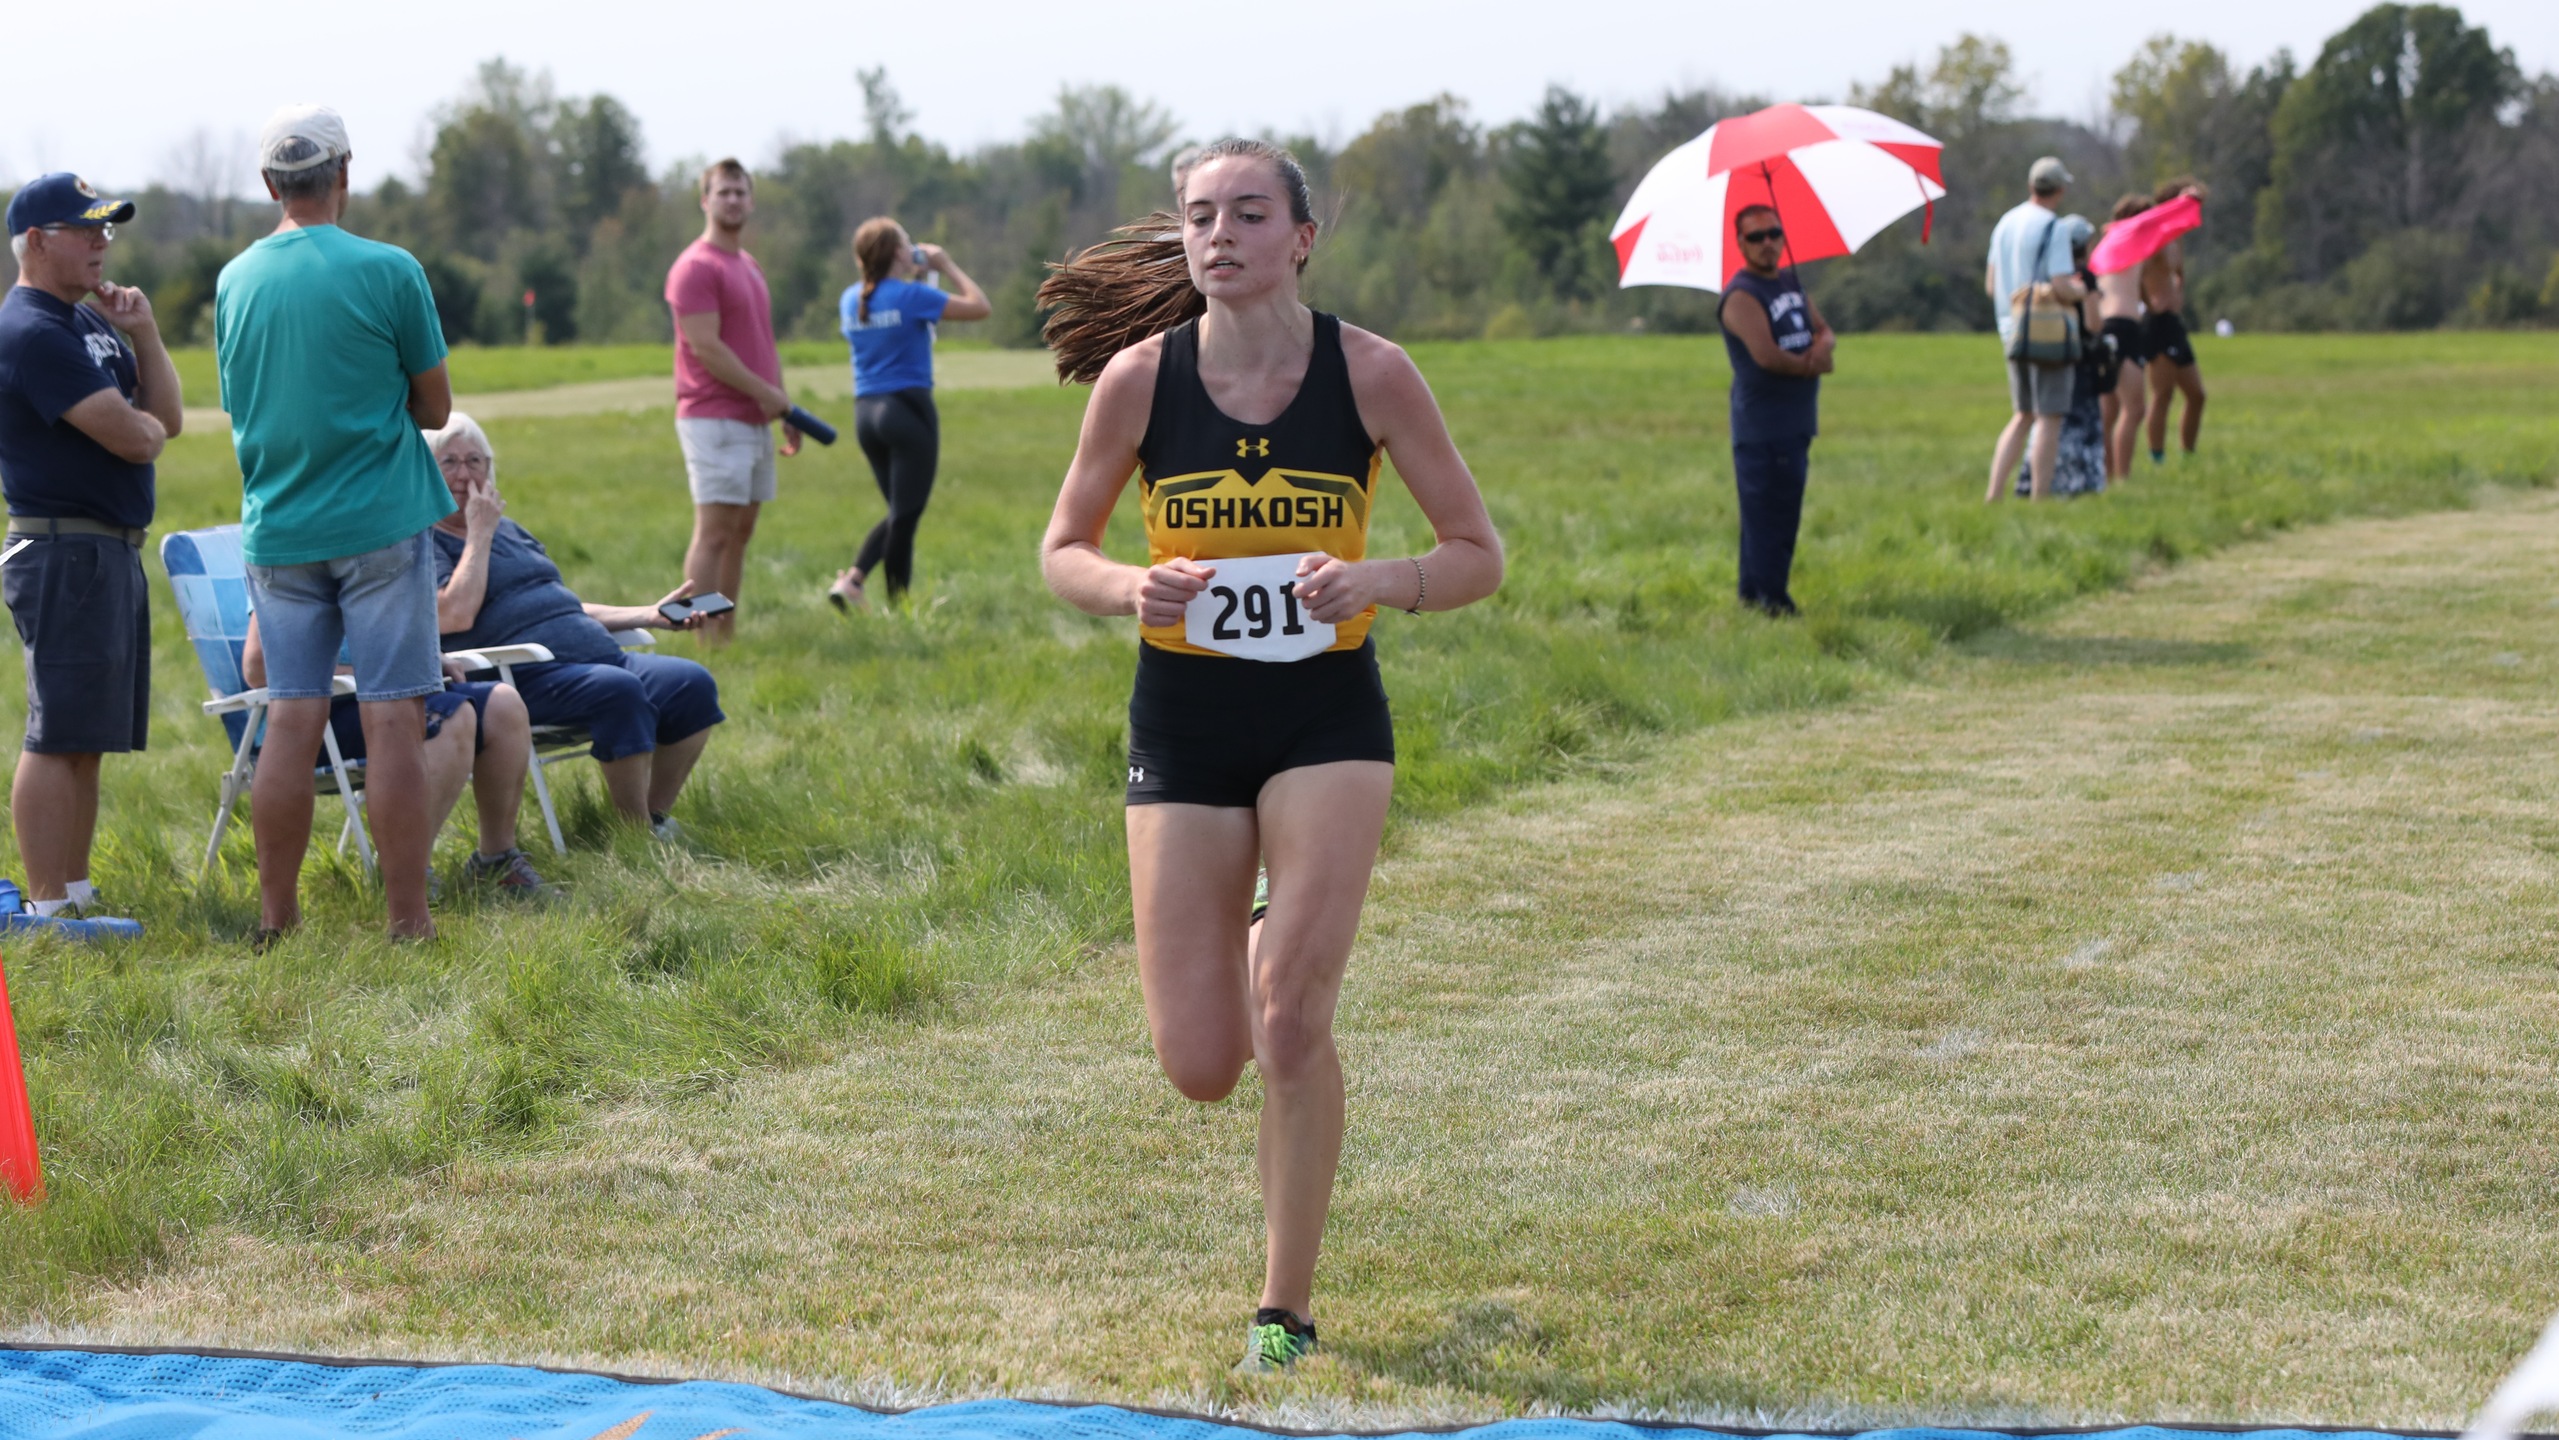 Hannah Lohrenz was a second-place finisher at the Oberlin College Inter-Regional Rumble.